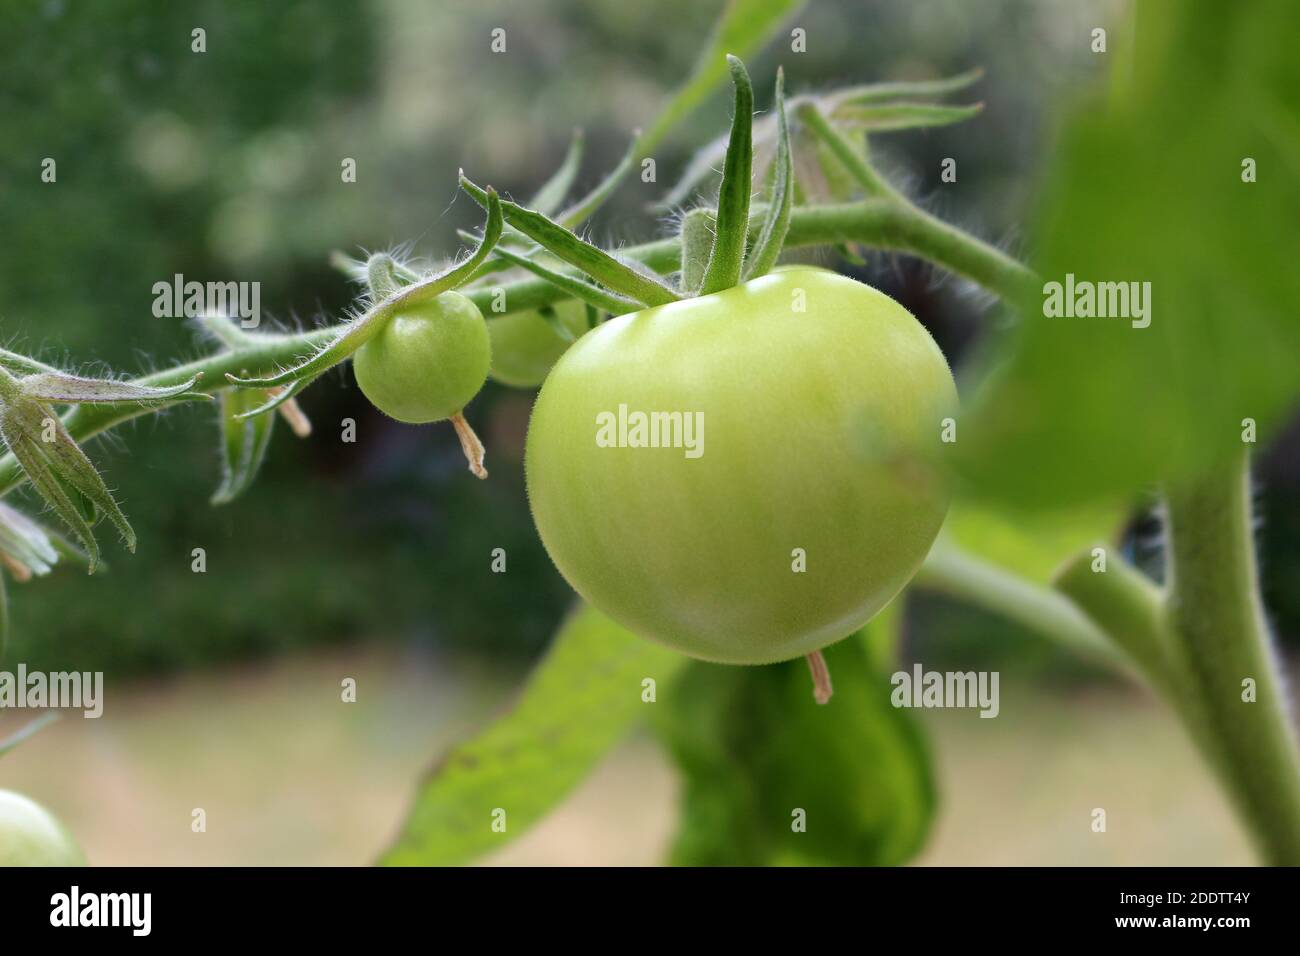 A green tomato ripening on the vine Stock Photo